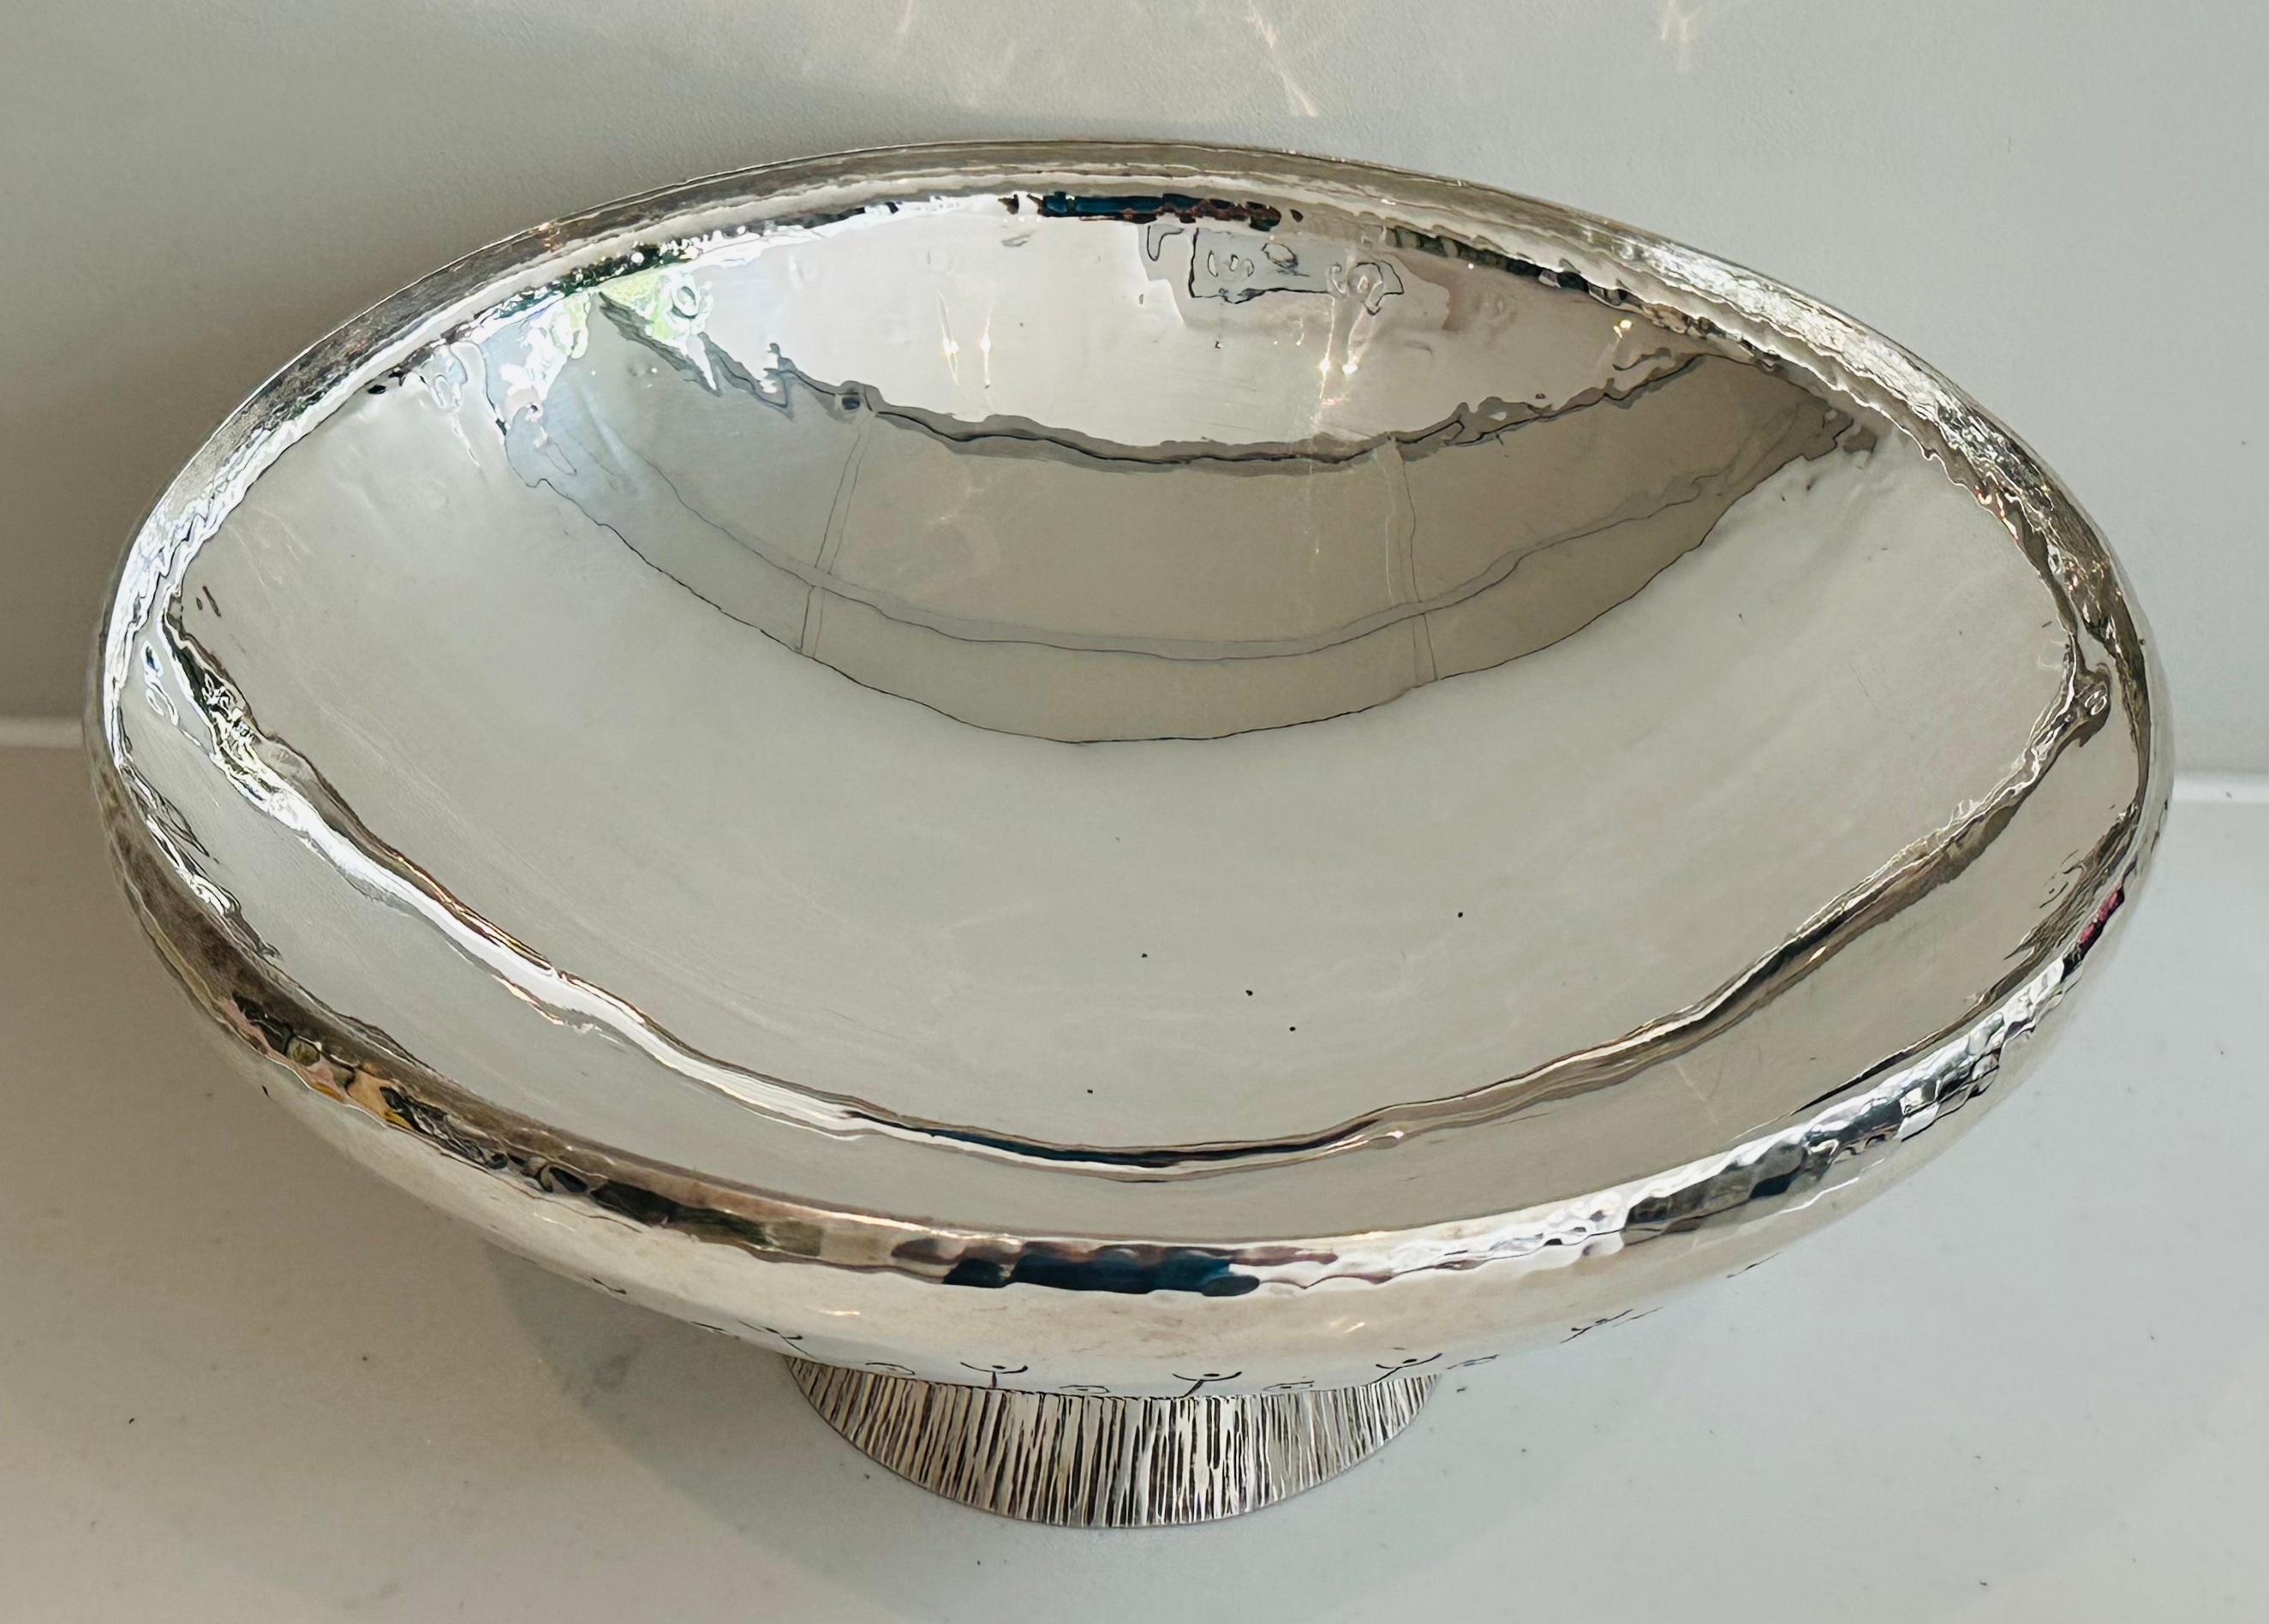 1980s English Silver Plated Decorative Hand-Hammered Serving or Display Bowl 7